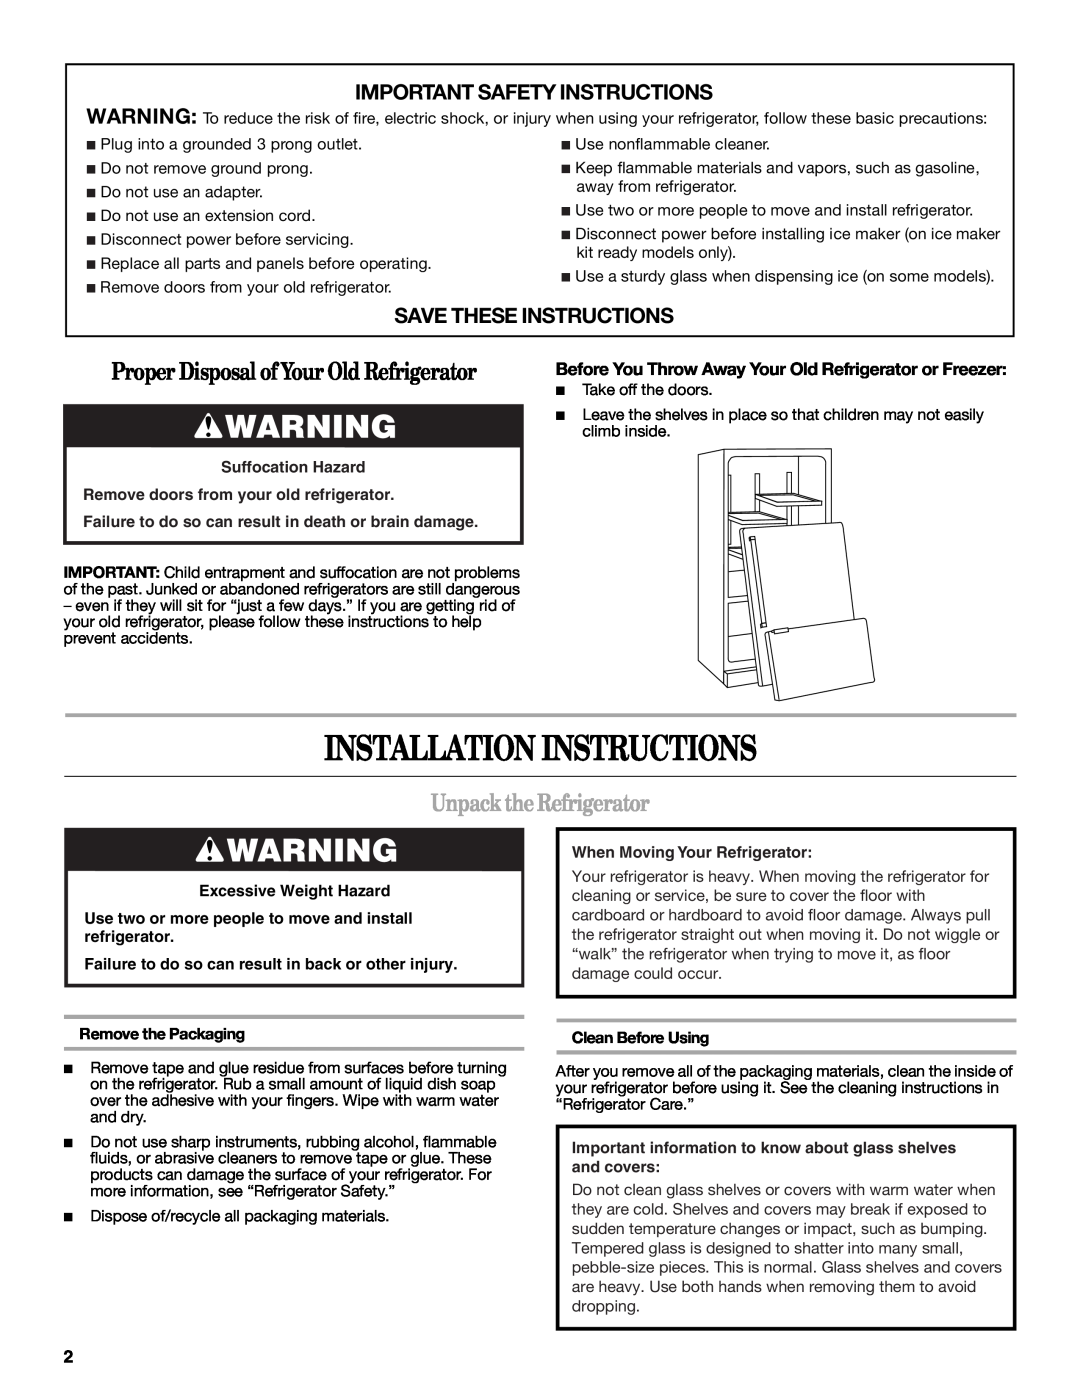 Whirlpool W10226405A Installation Instructions, Unpack the Refrigerator, Important Safety Instructions, Suffocation Hazard 